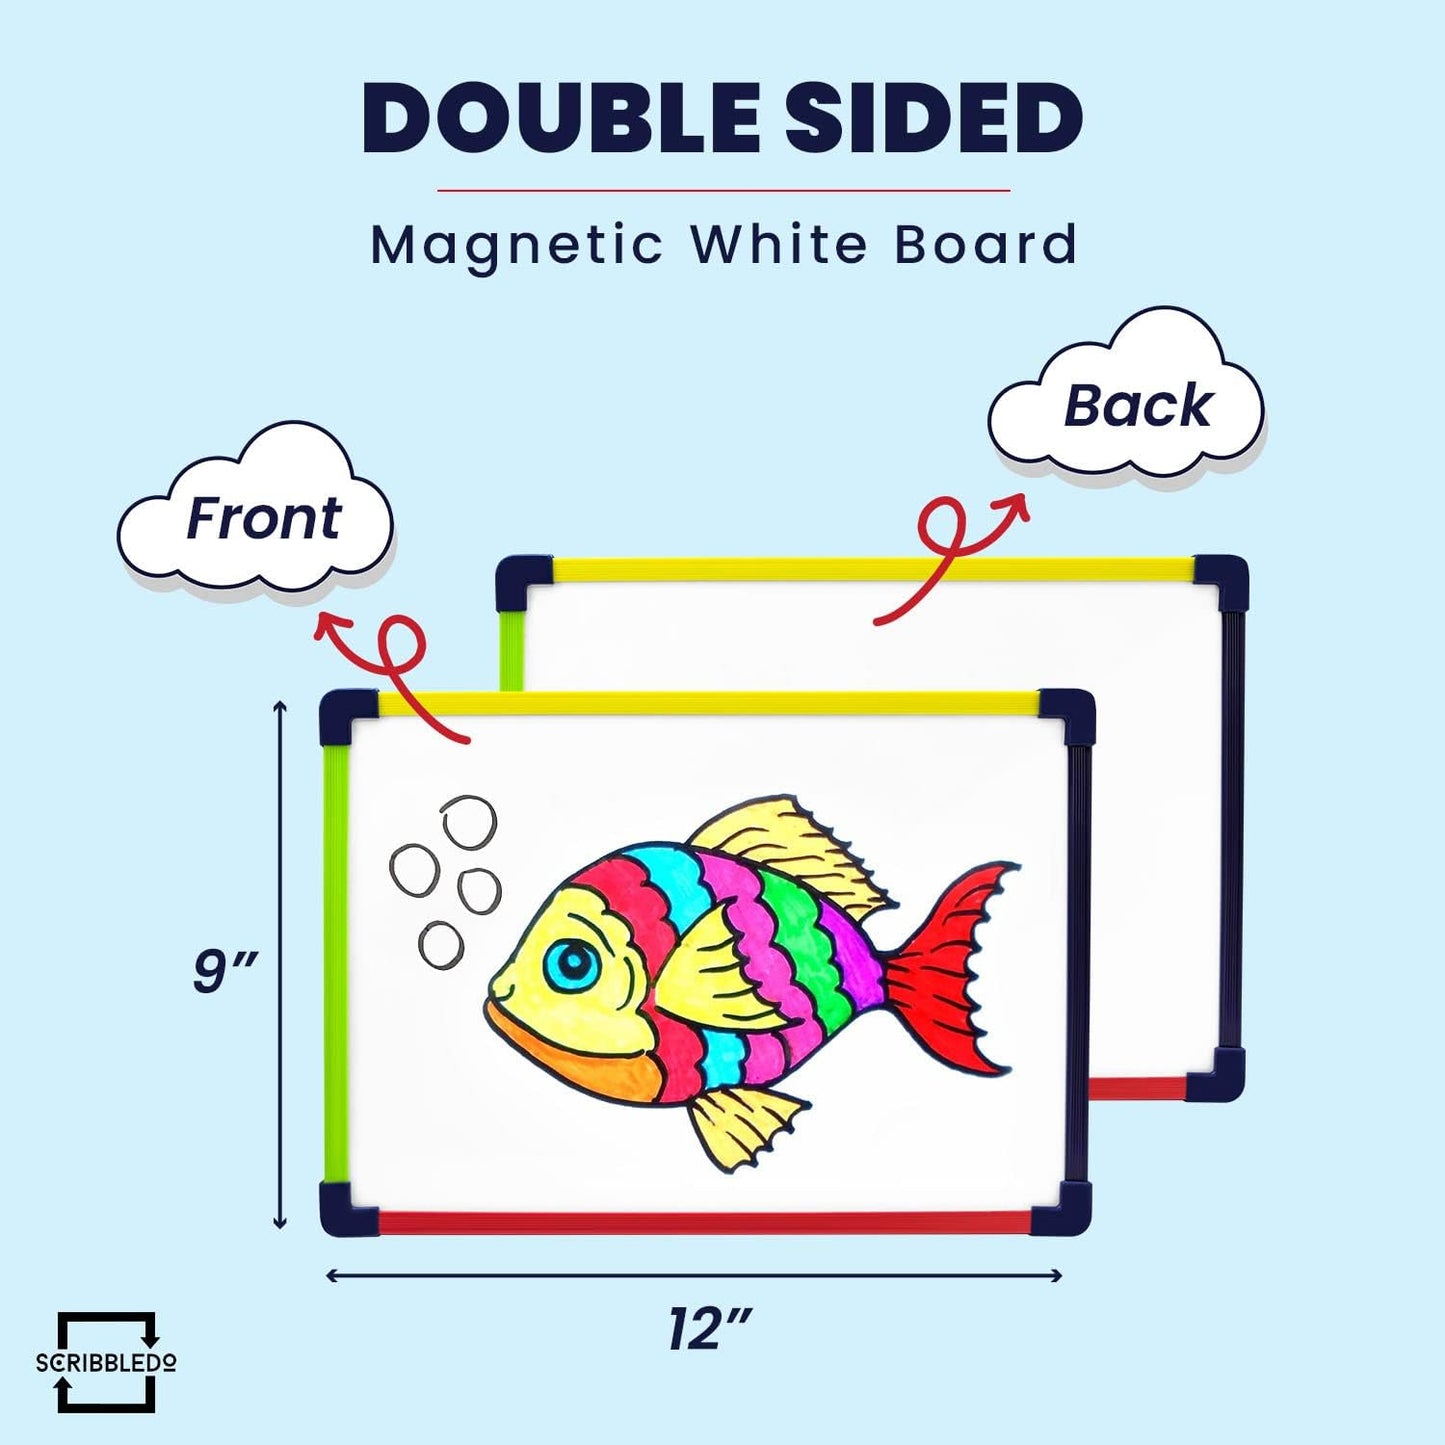 doubled sided 9x12 portable white board with stand 